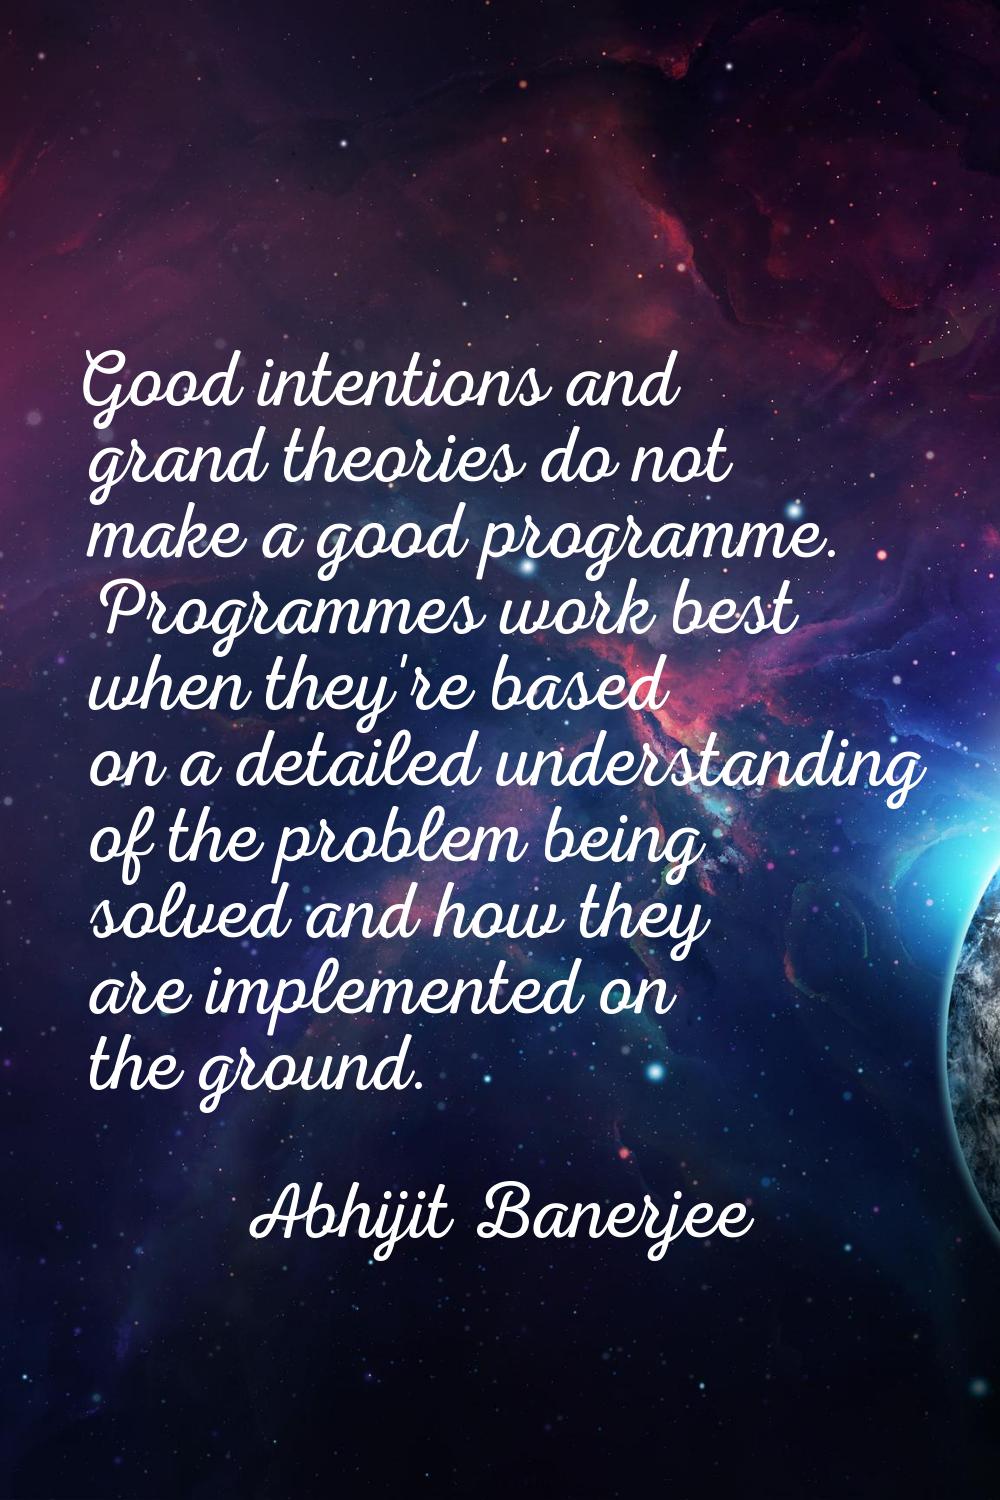 Good intentions and grand theories do not make a good programme. Programmes work best when they're 